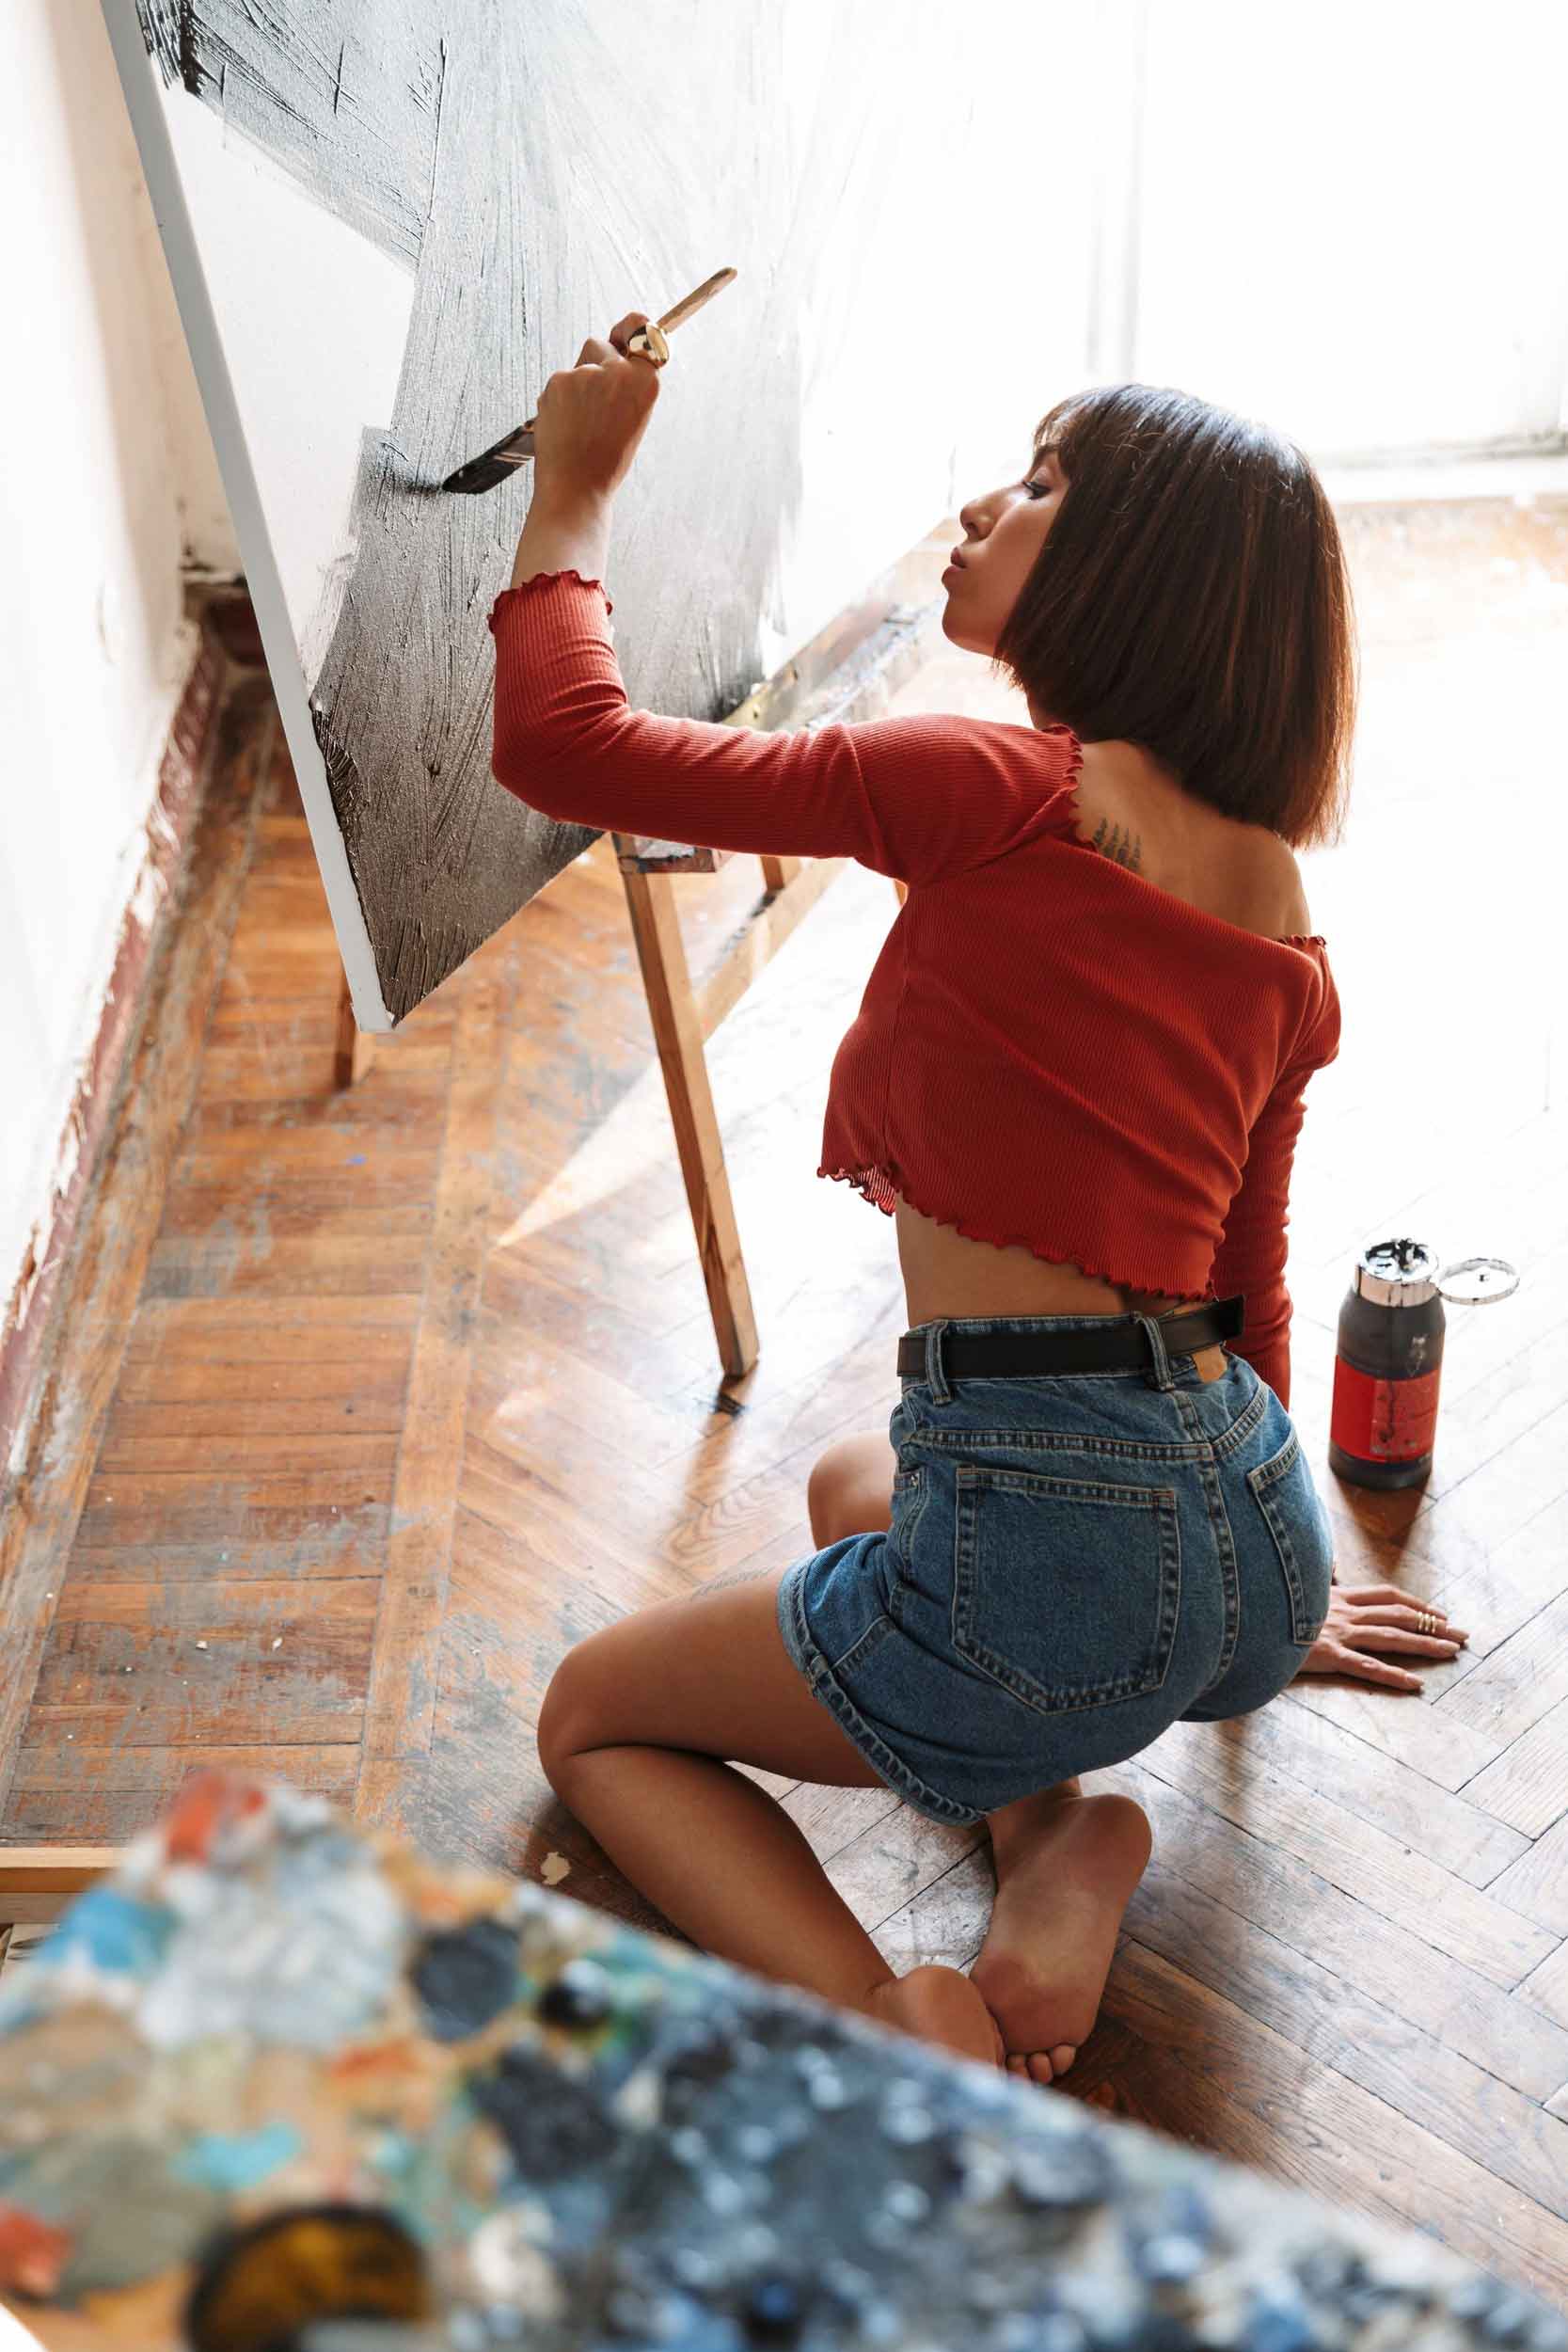 portrait-of-young-woman-using-painting-tools-while-92SJDEG